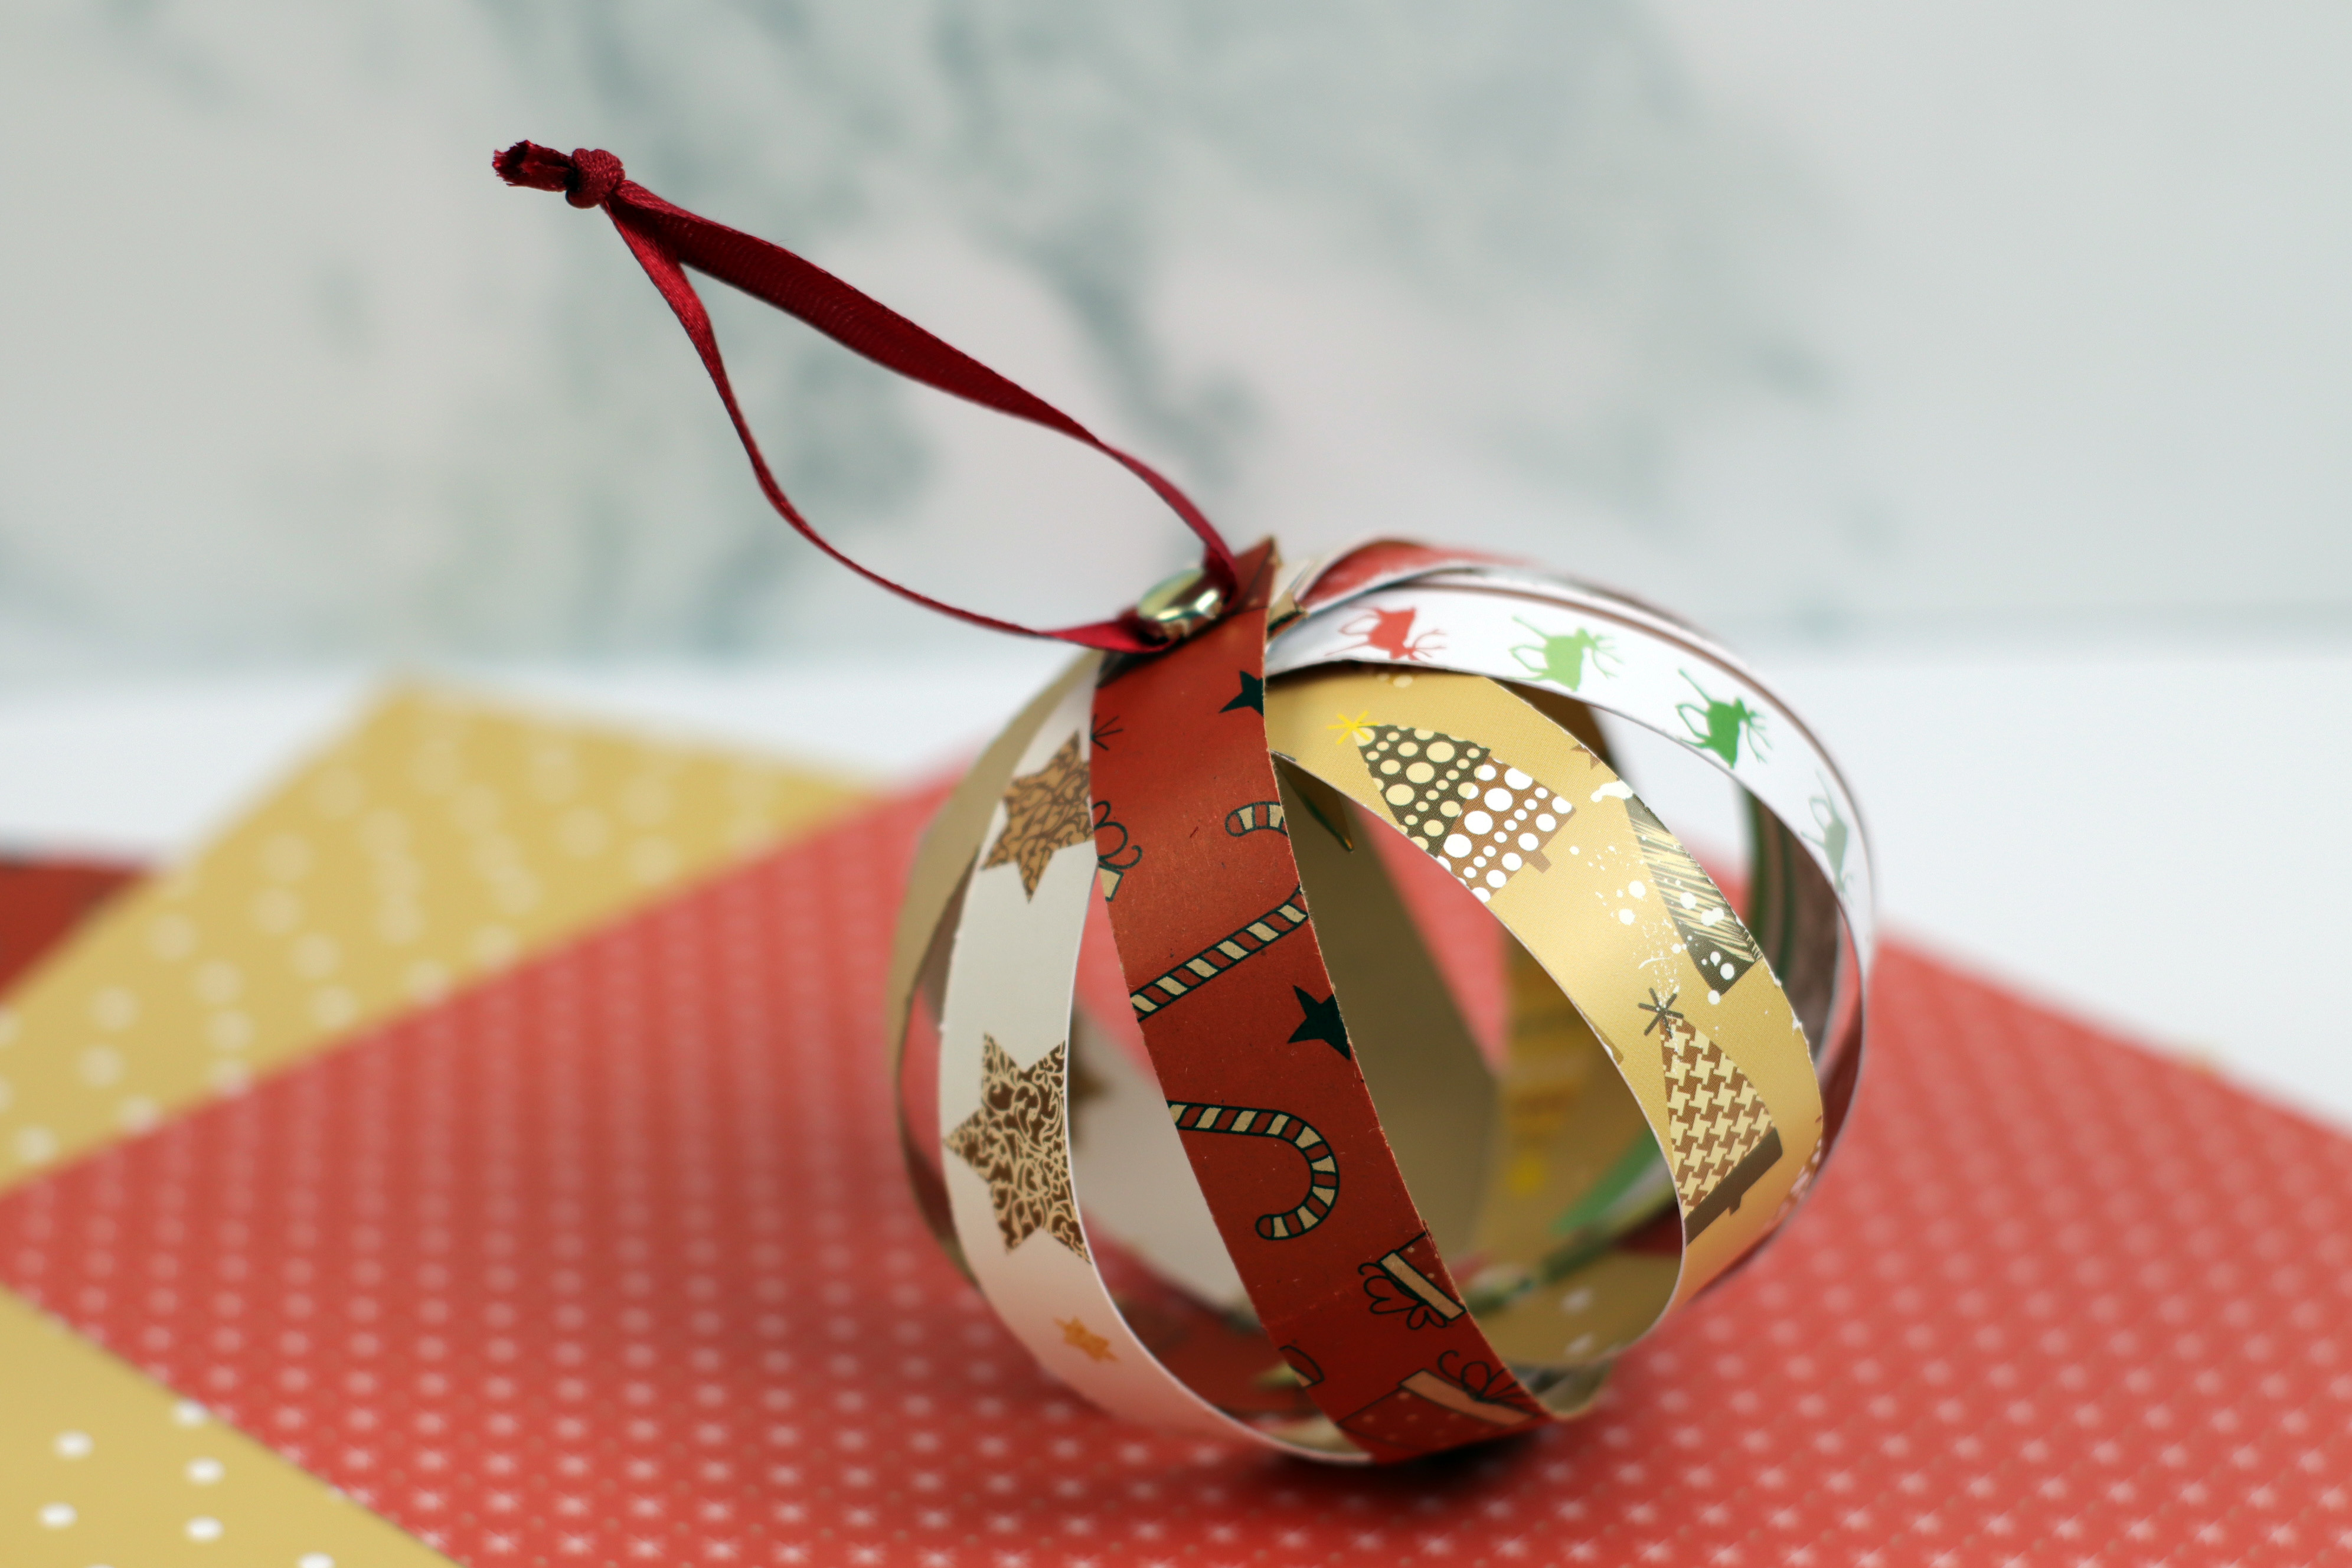 Paper Strips Christmas Tree Ornament Craft